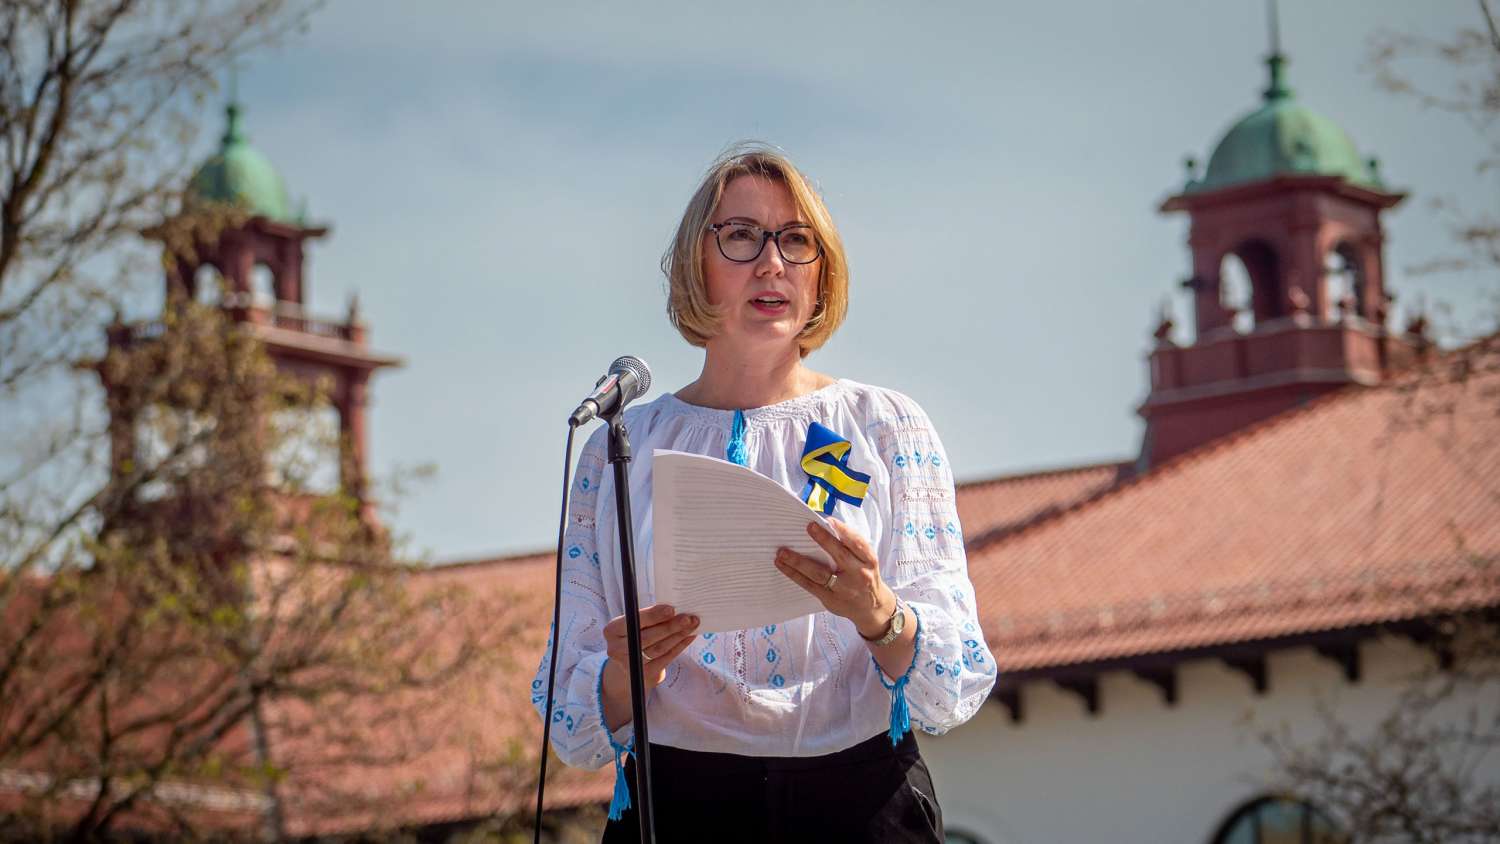 Woman at microphone delivering a speech with cole hall belltowers in the background